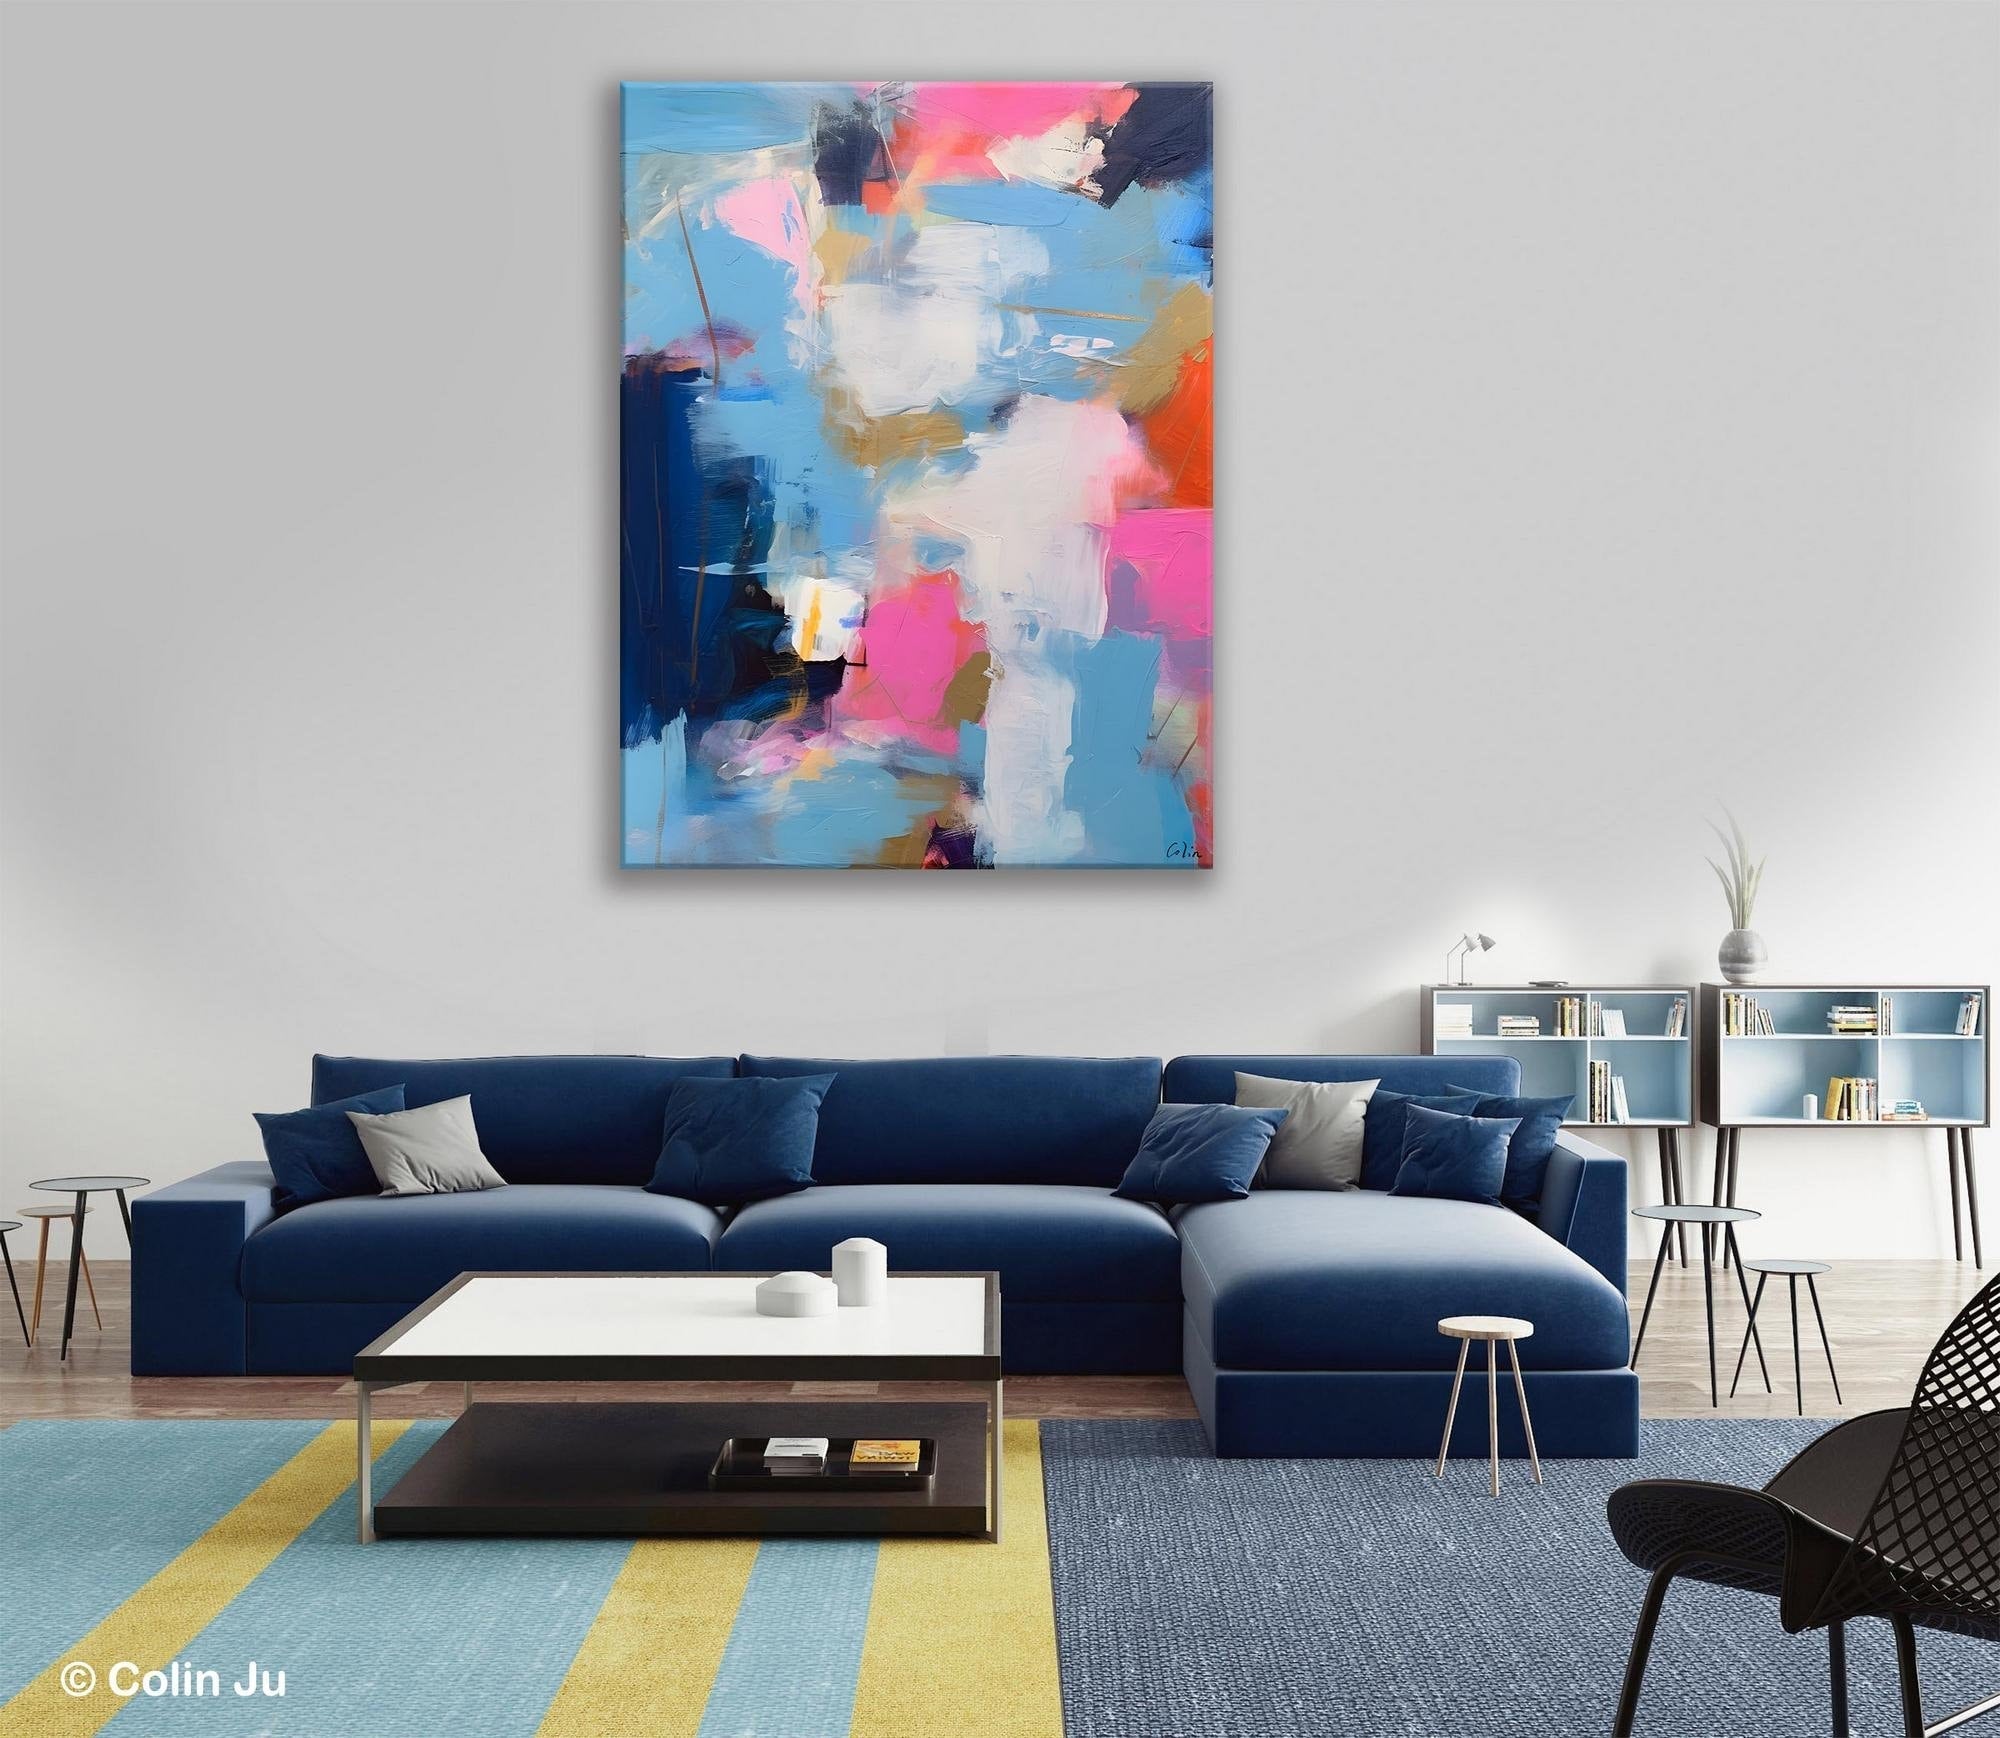 Oversized Modern Abstract Wall Paintings, Original Canvas Art, Contemporary Acrylic Painting on Canvas, Large Wall Art Painting for Bedroom-Art Painting Canvas